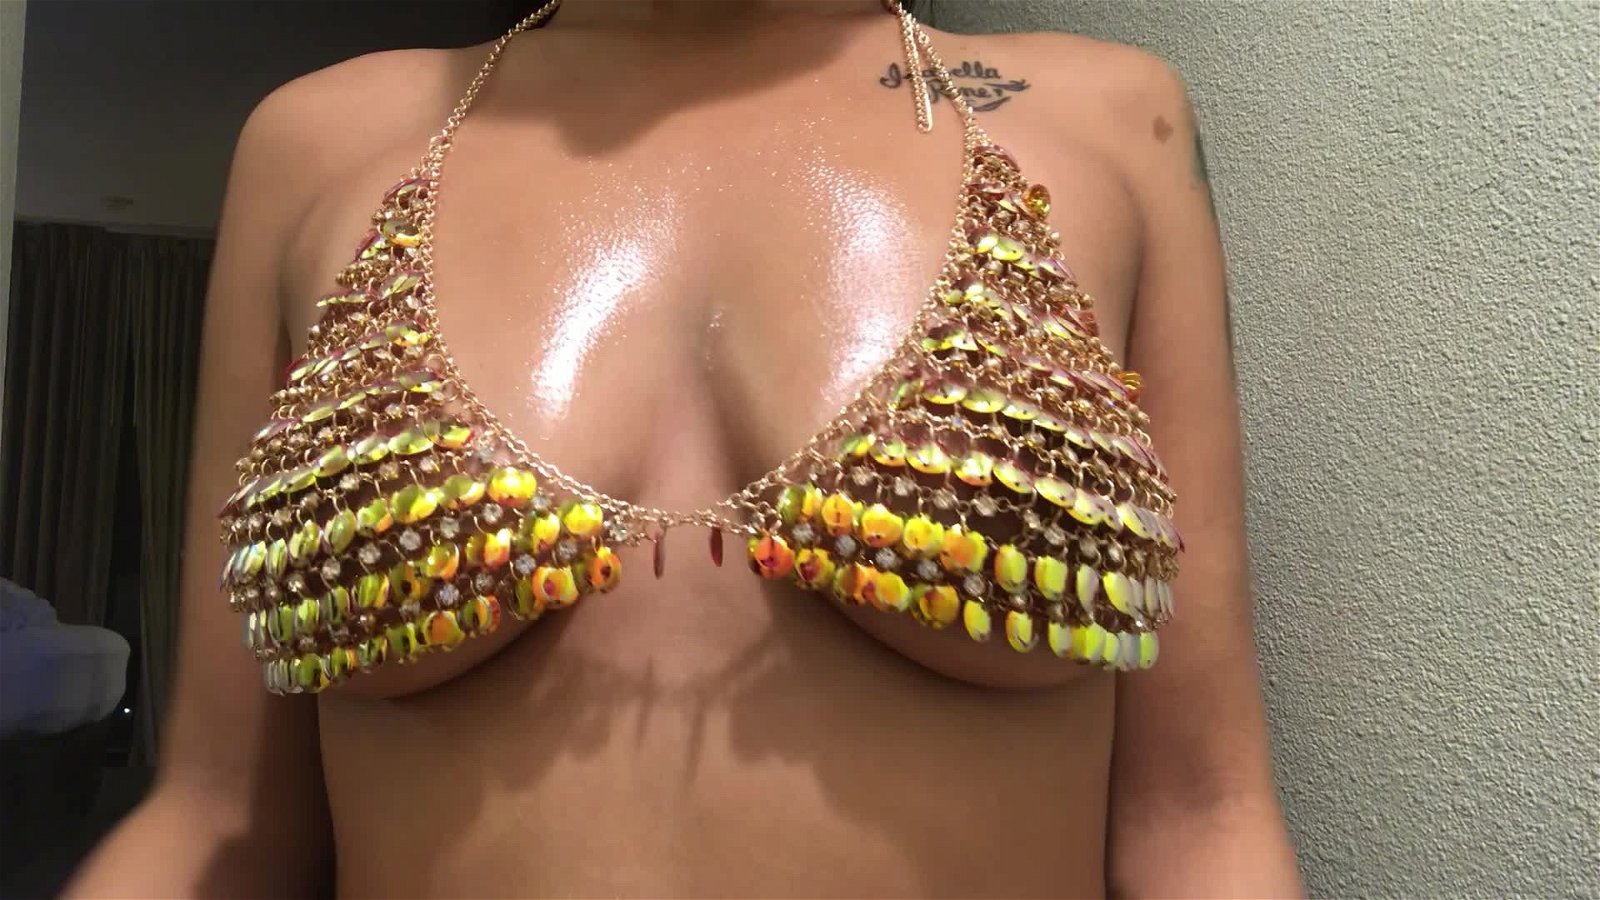 Video by Ms Alina Love with the username @alinalove7600, who is a star user,  April 26, 2021 at 12:15 AM. The post is about the topic Beautiful Breasts and the text says 'Get a Load of These! 
Hit The Link And subscribe for more!'